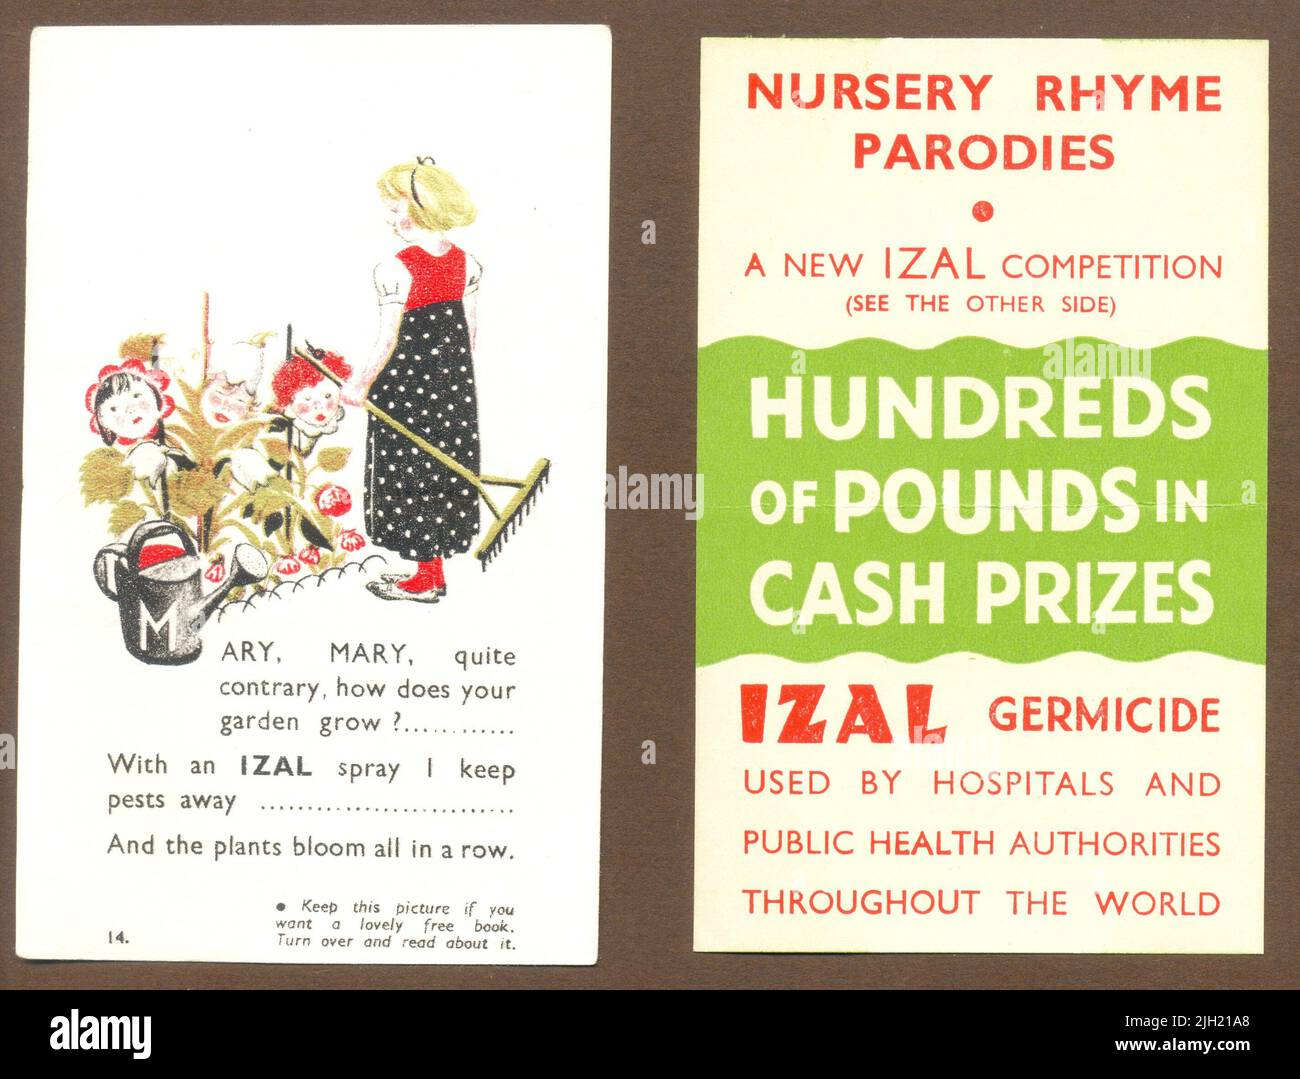 Entry coupons for new Izal competition for Nursery Rhyme Parodies circa 1950 Stock Photo